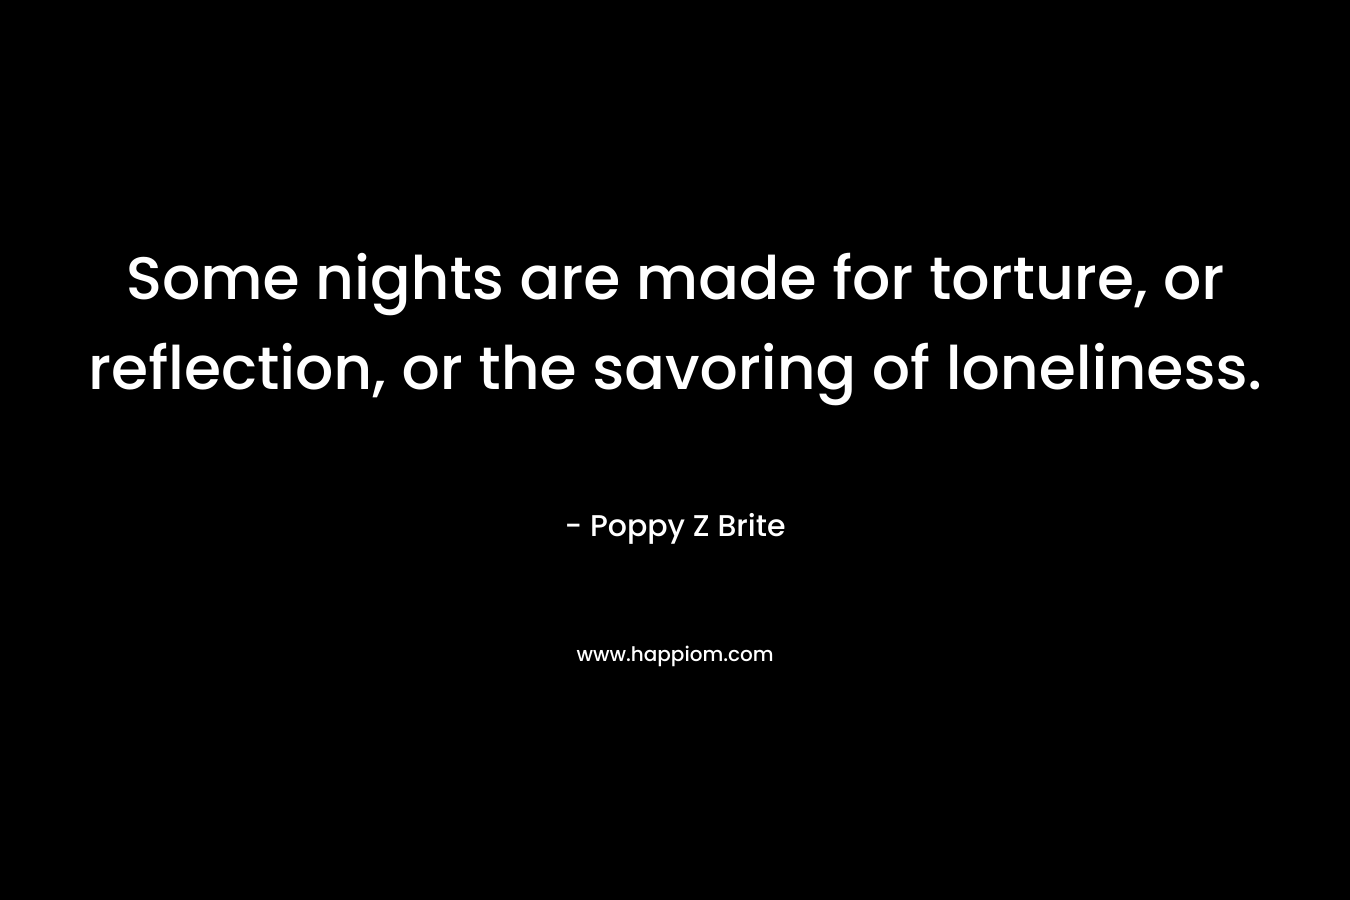 Some nights are made for torture, or reflection, or the savoring of loneliness. – Poppy Z Brite